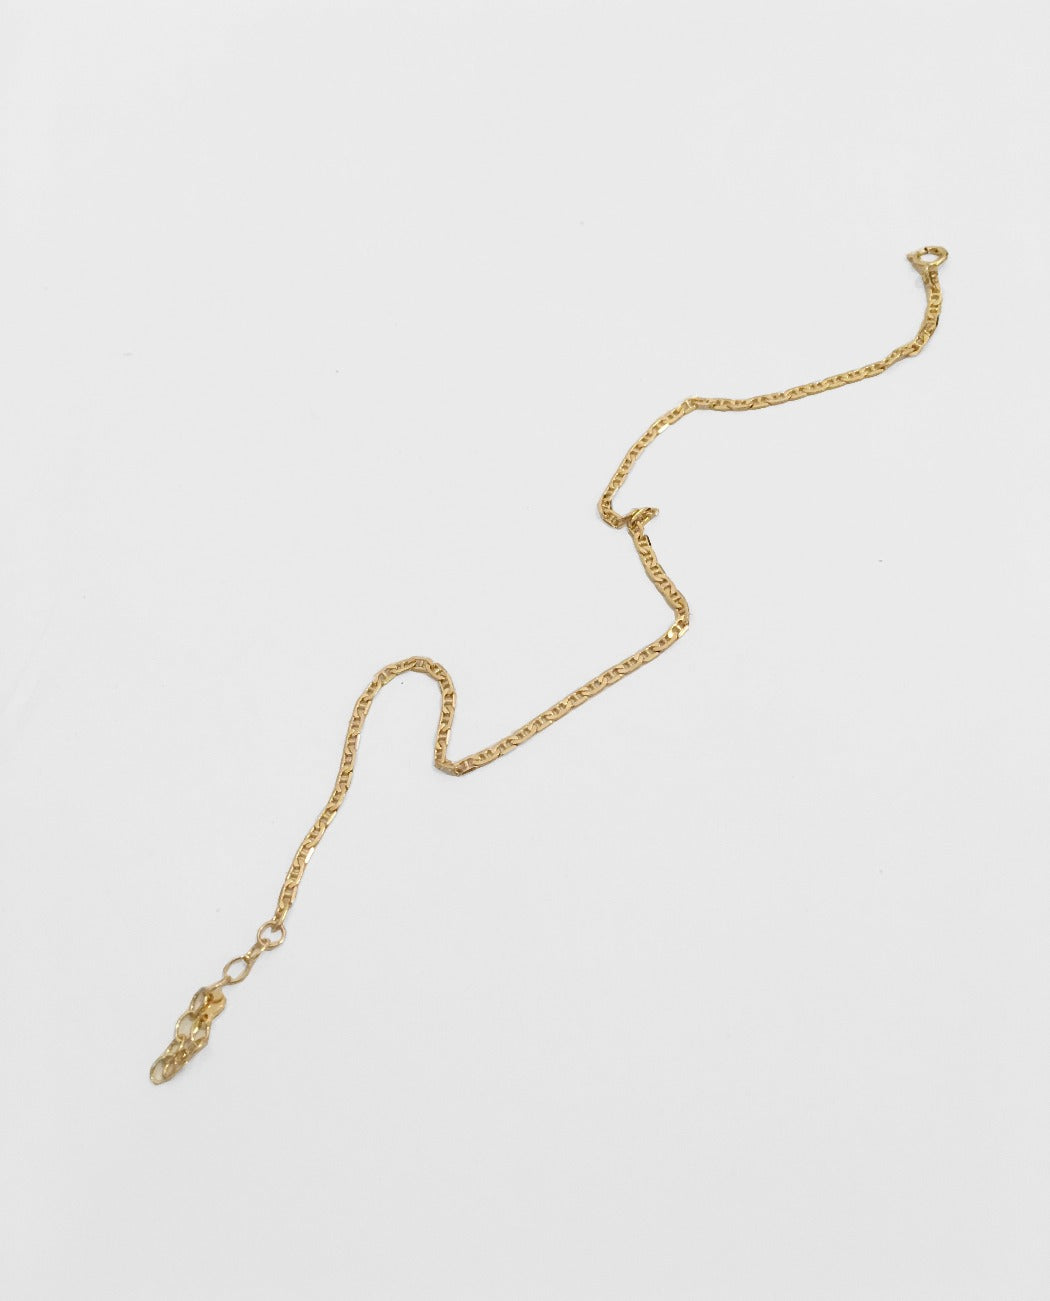 Pernille Corydon Therese Anklet Goldplated Silver NL Utrecht